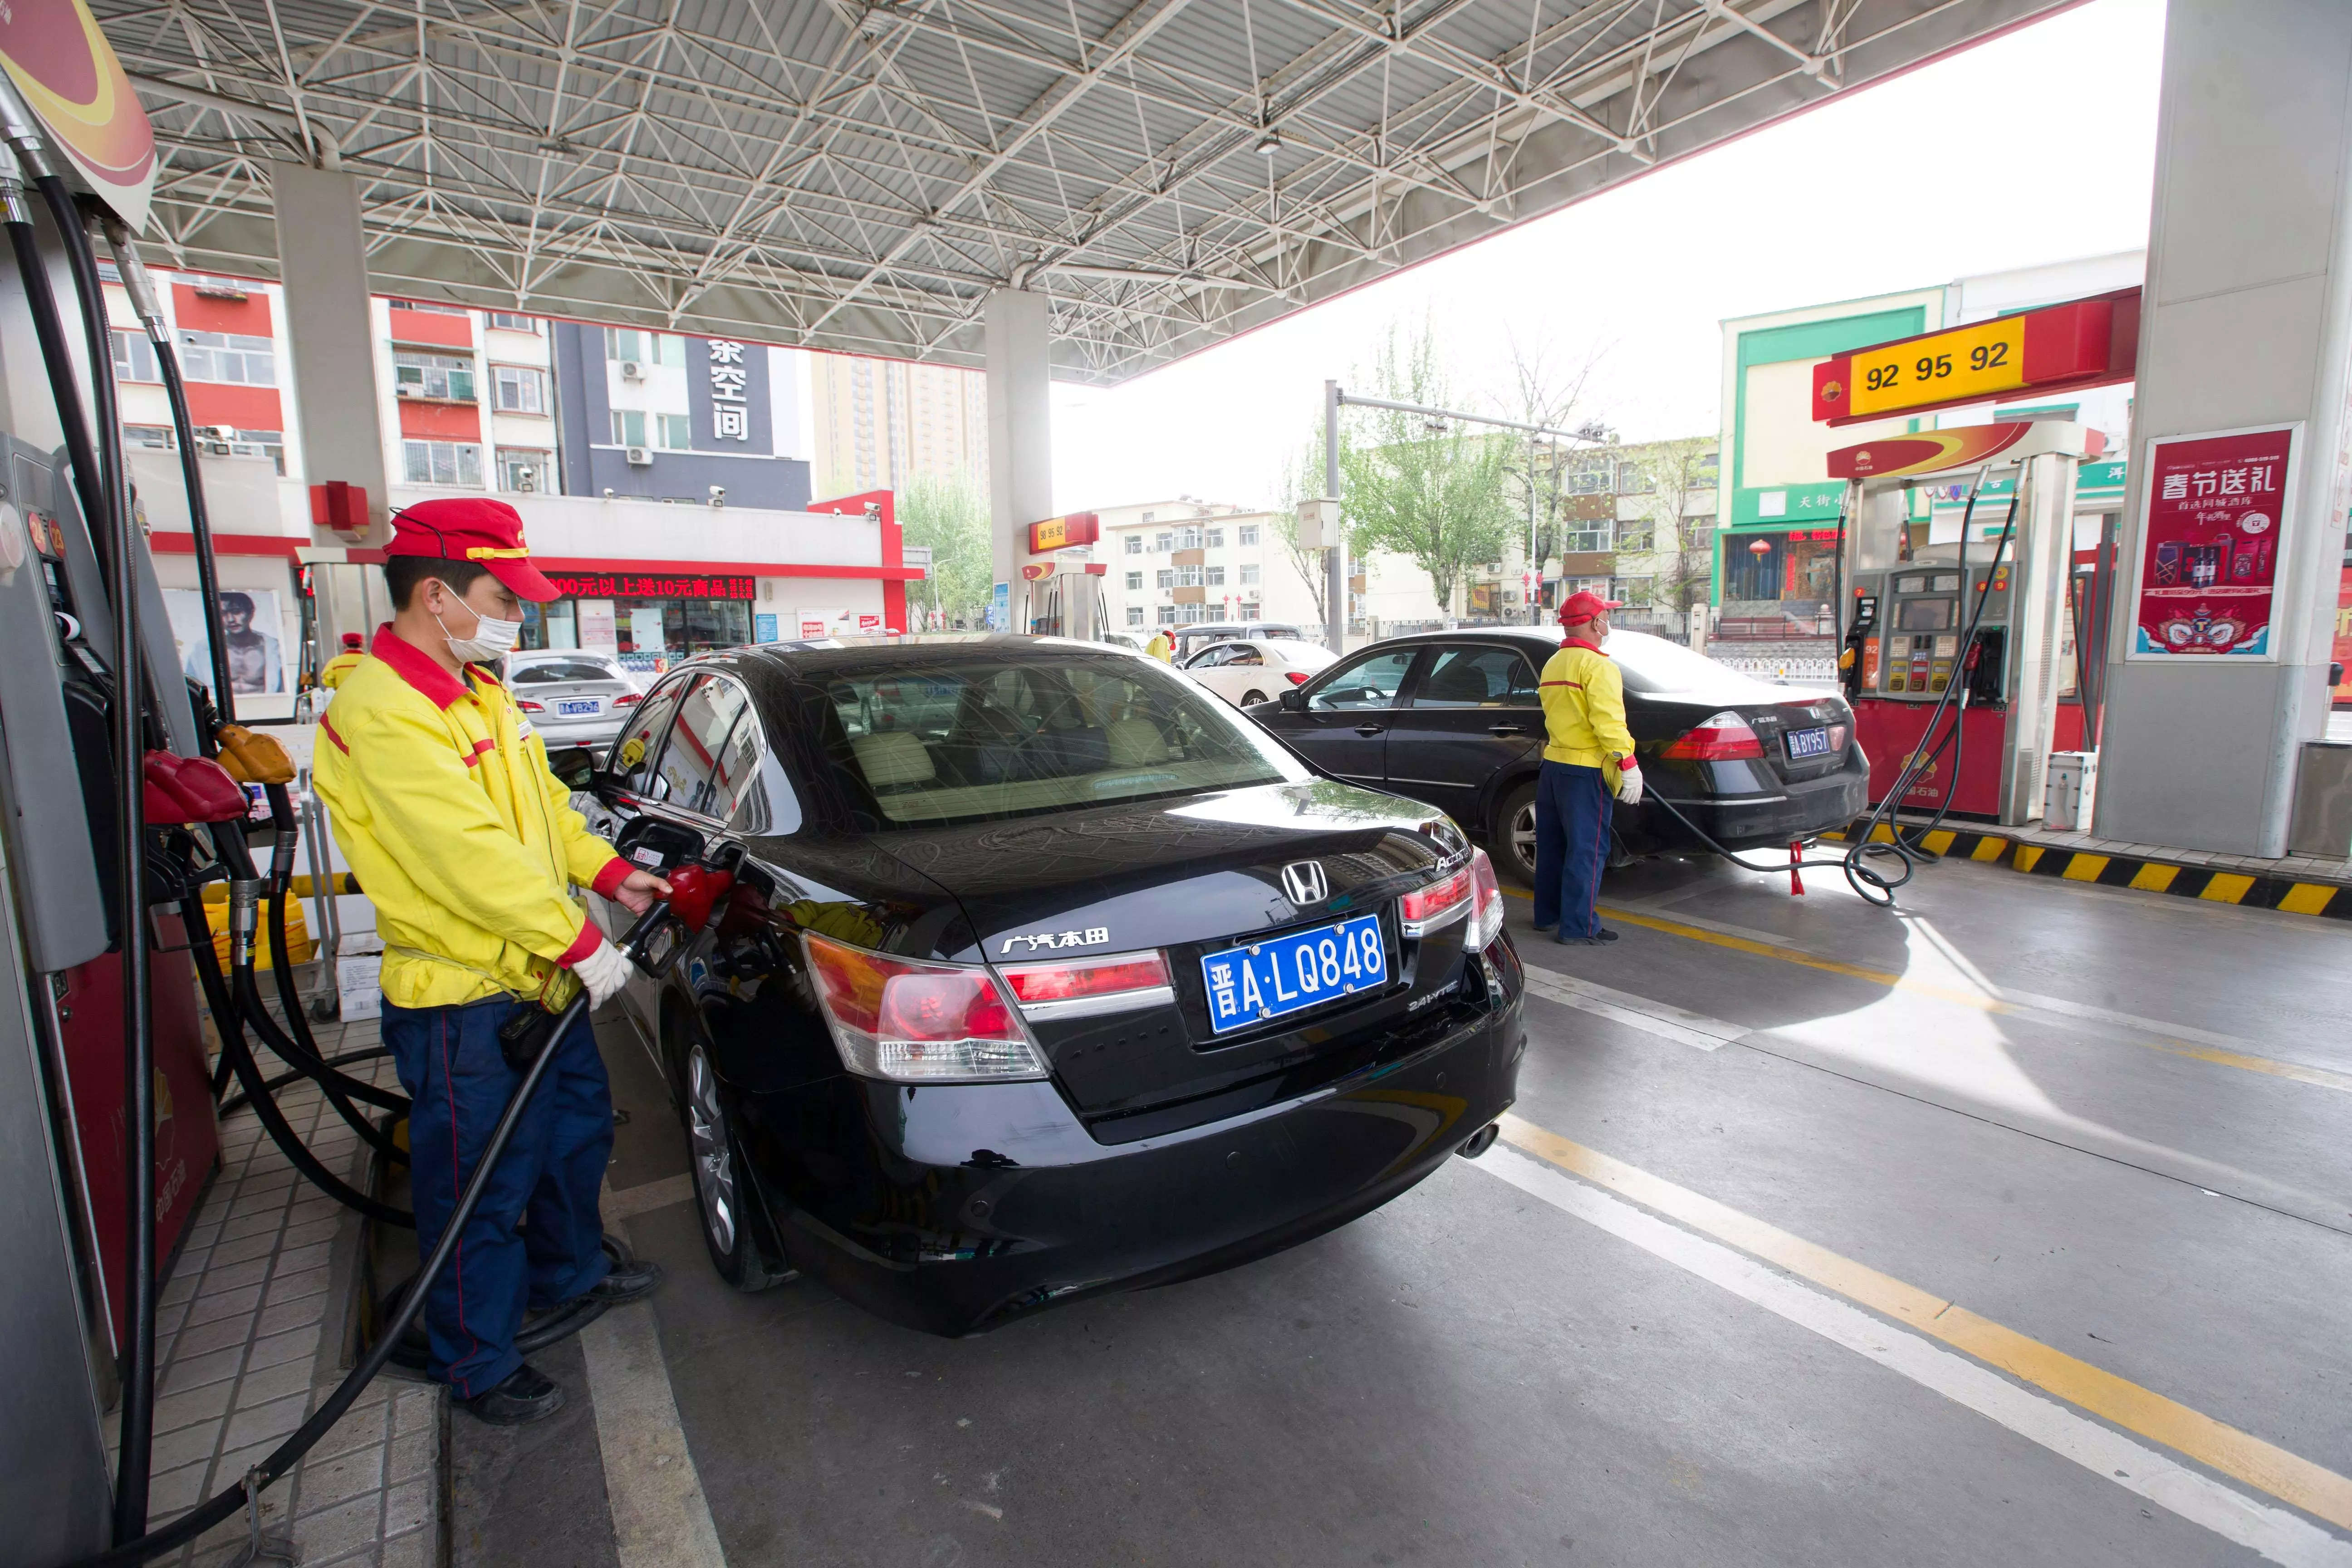 China’s oil demand drops sharply as Beijing expands zero-Covid policy, OPEC says